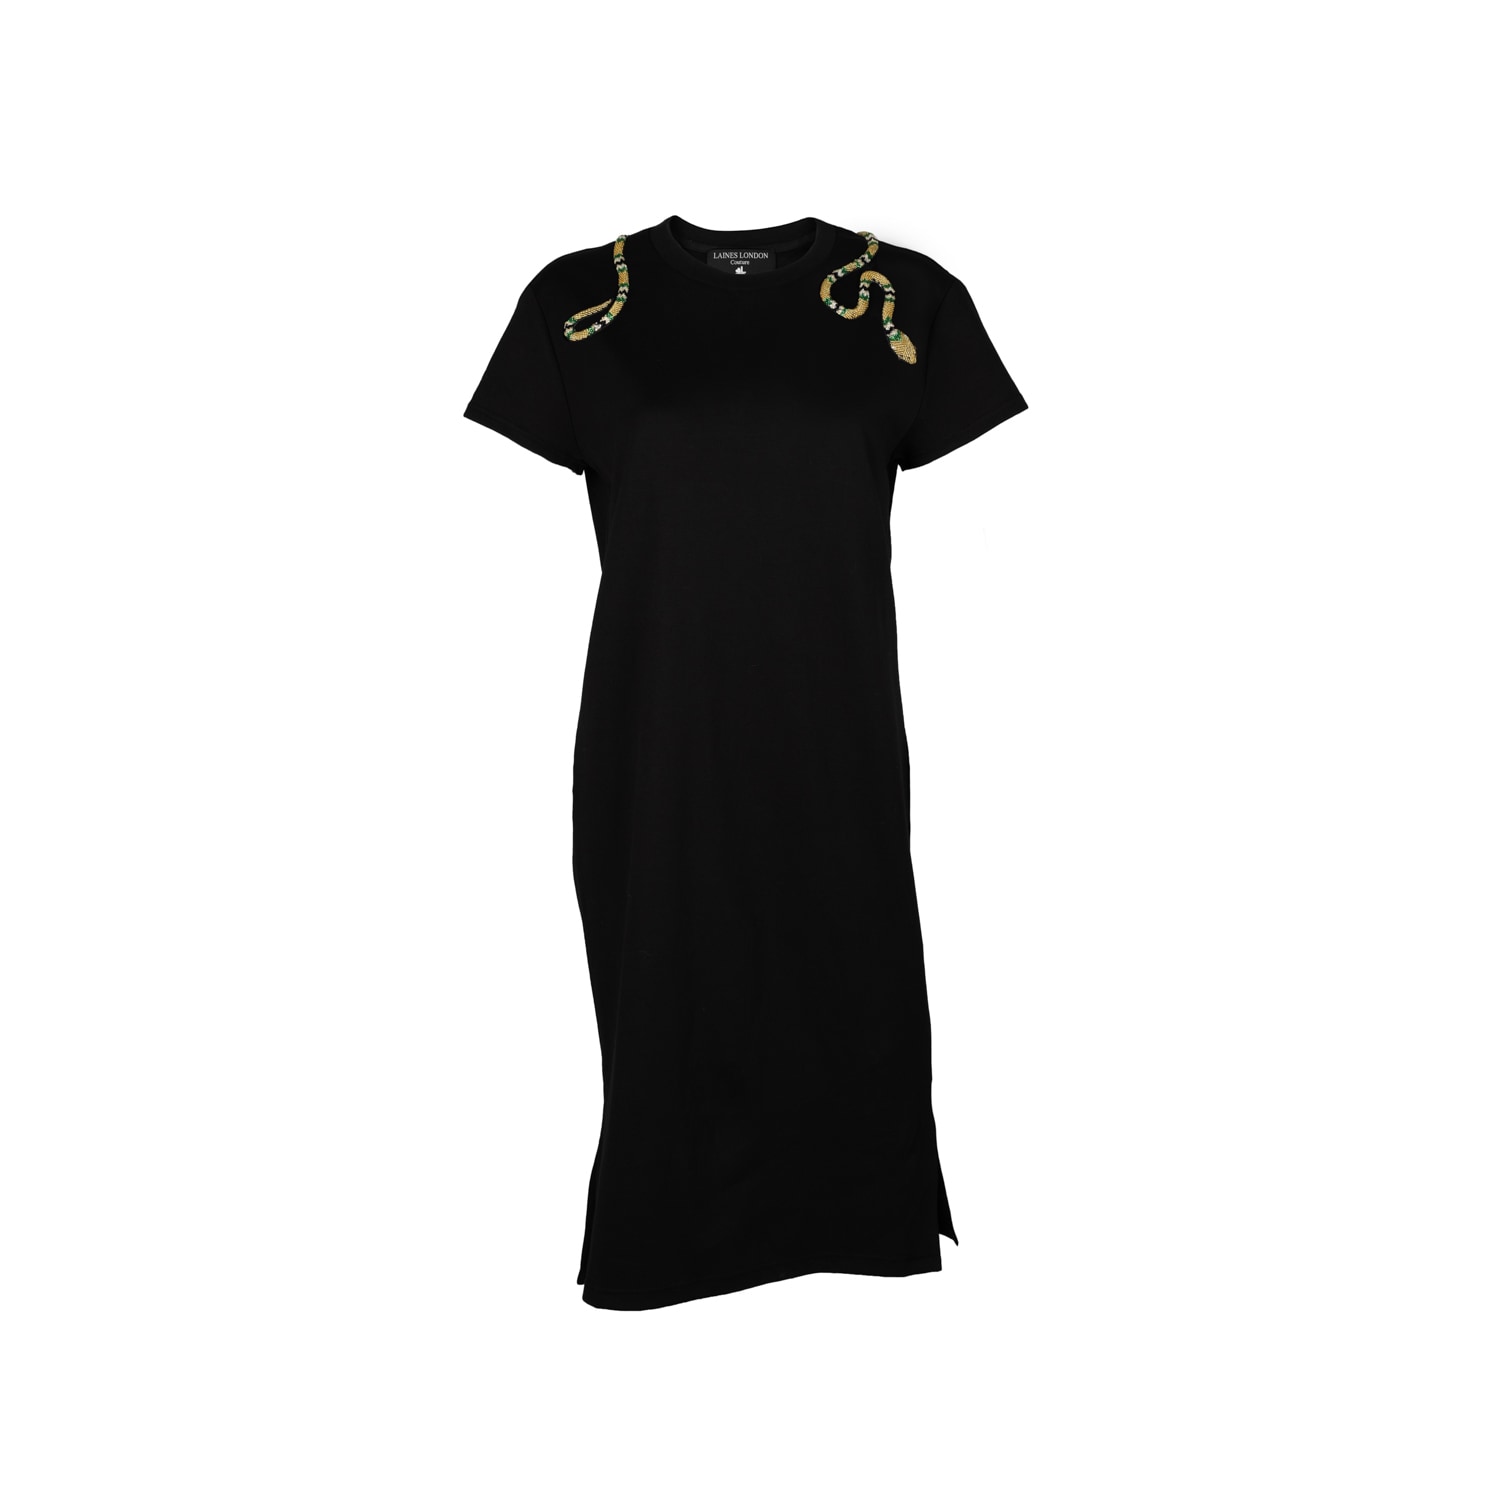 Laines London Women's Black Laines Couture T-shirt Dress With Embellished Green & Gold Wrap Around Snake